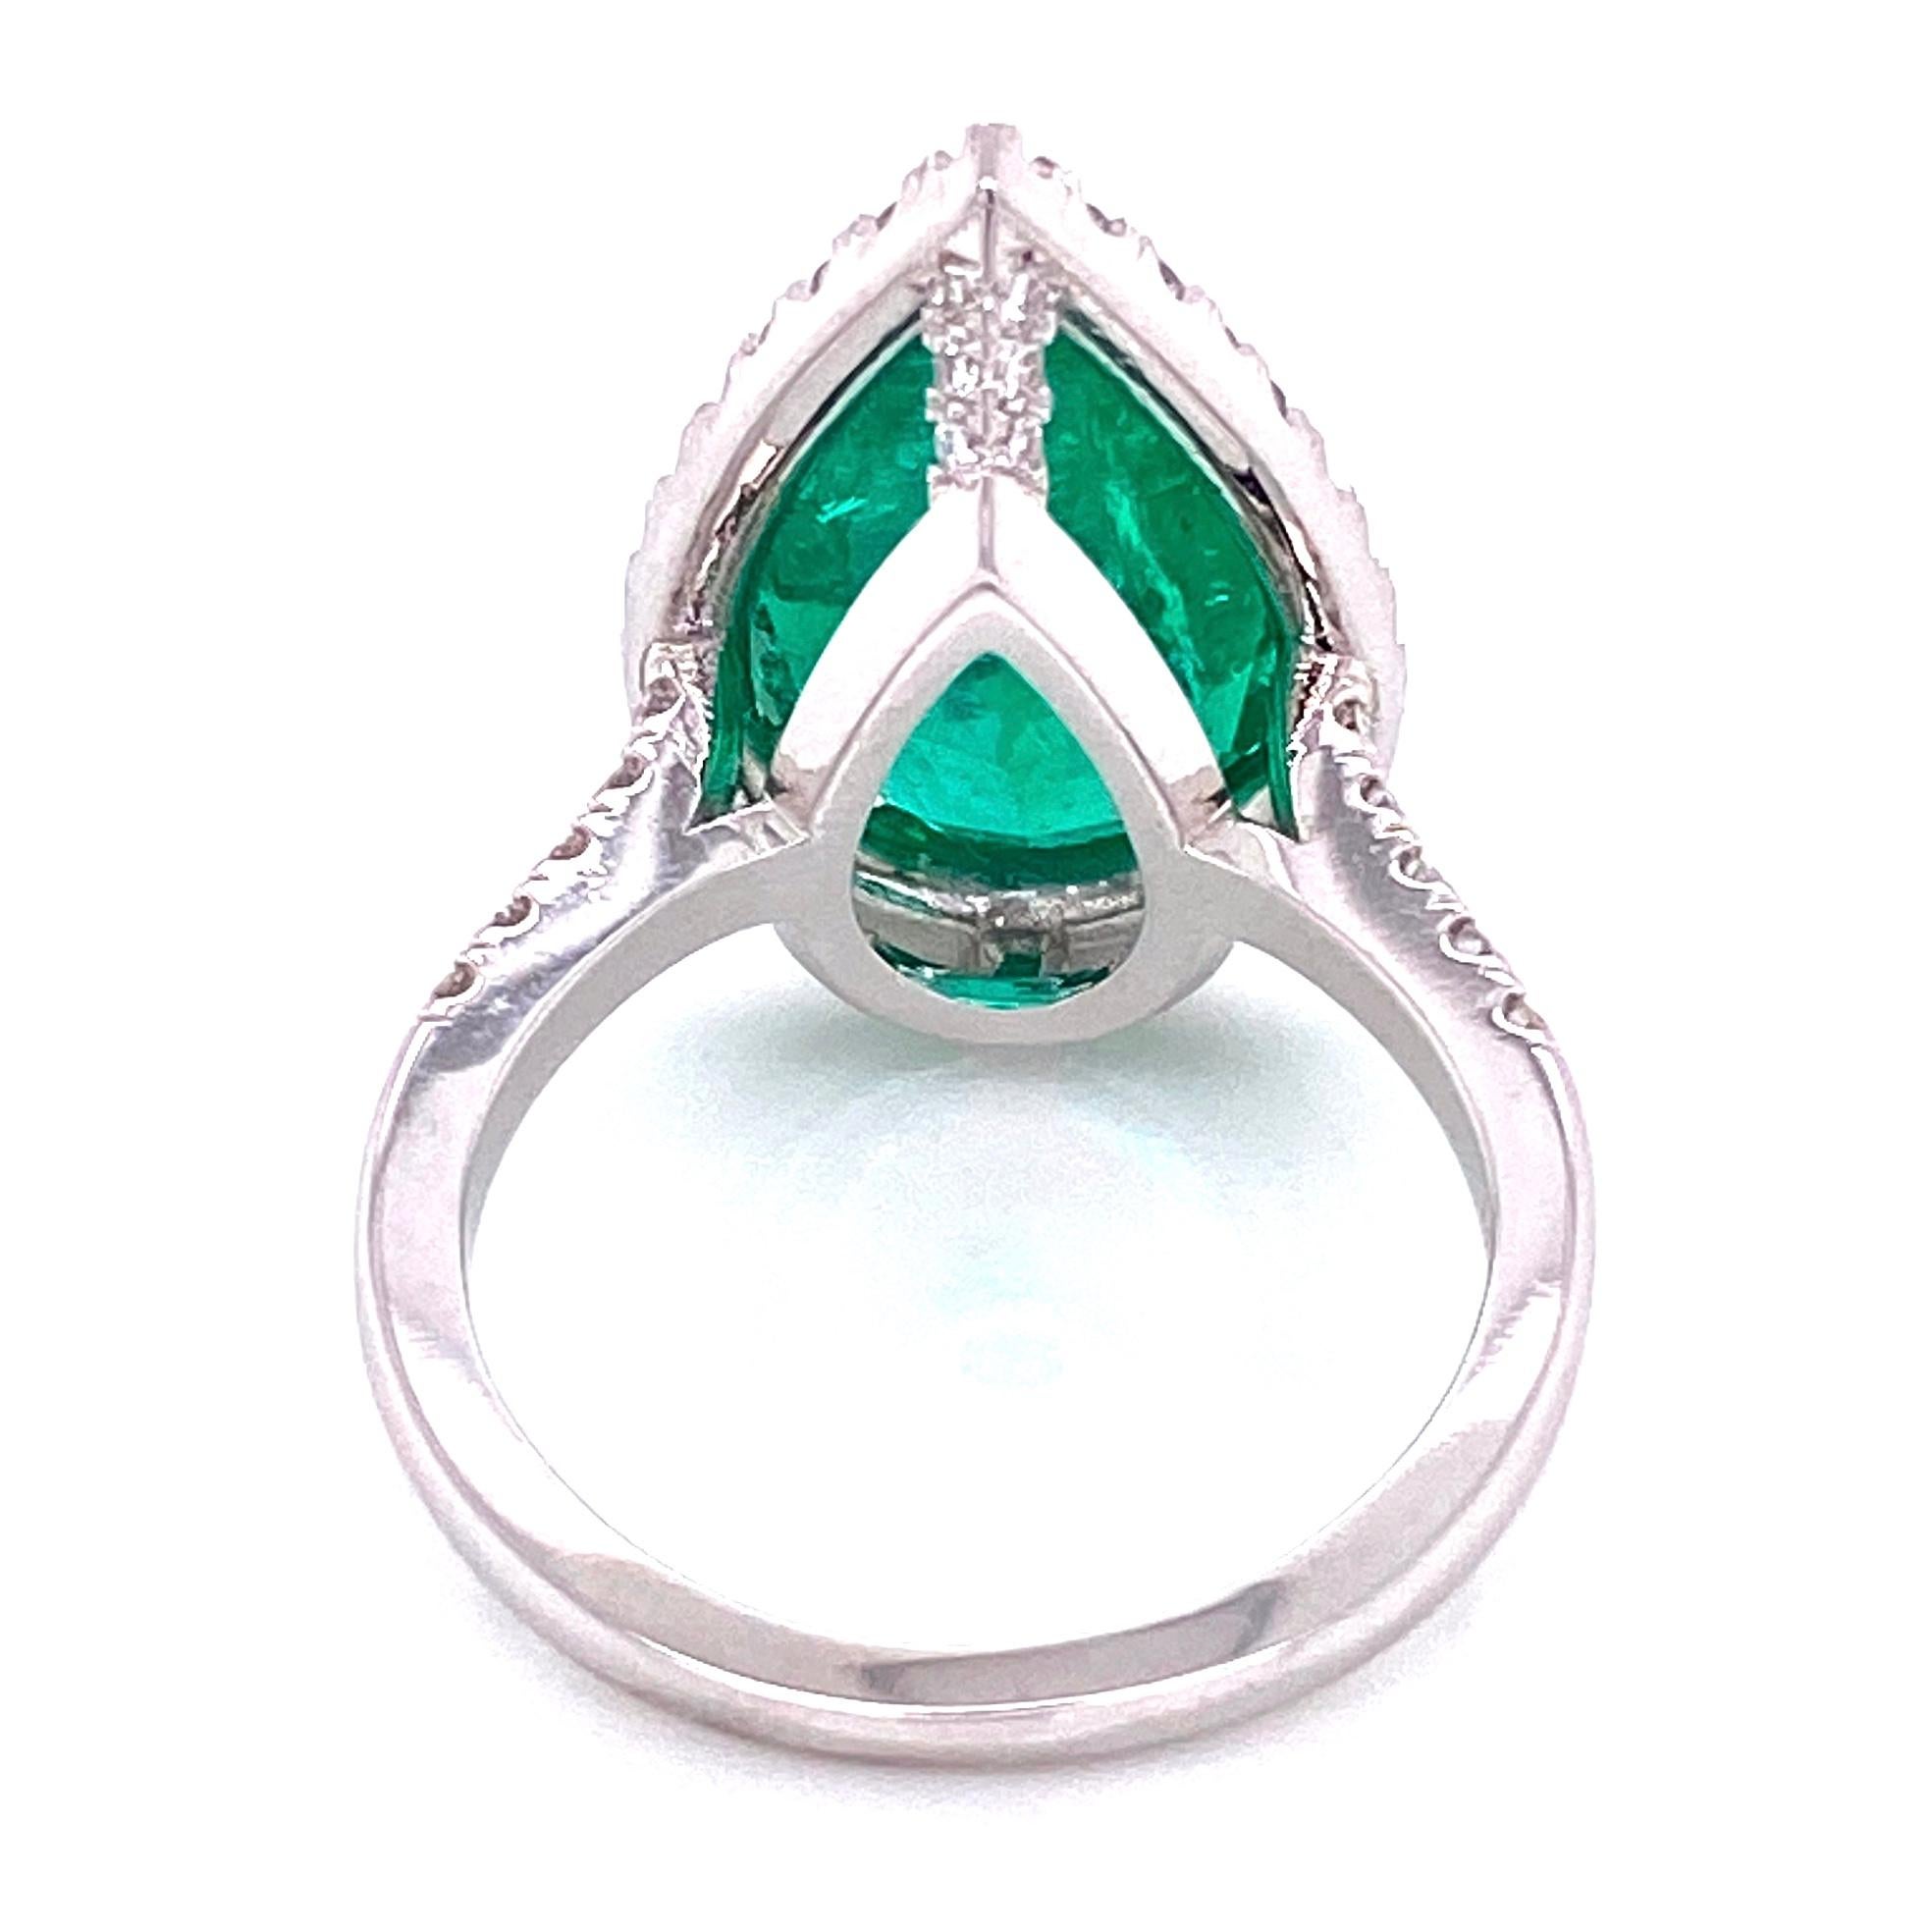 6.96 Carat Pear Shaped Emerald and Diamond Ring Estate Fine Jewelry For Sale 1